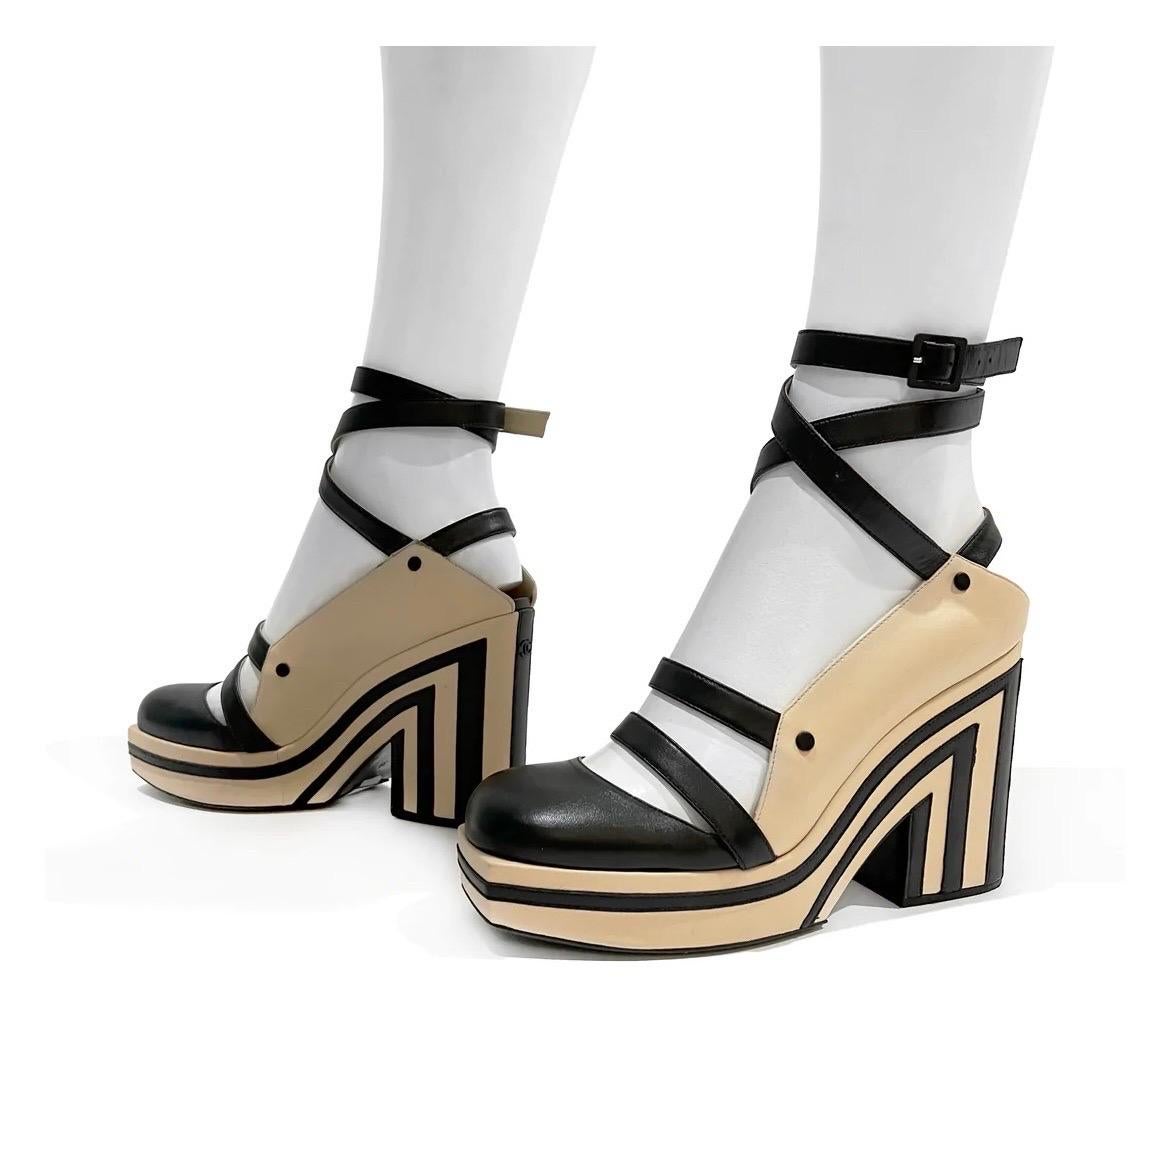 Leather Striped Block Platform Strap Heel by Chanel   
Spring 2013 Ready-To-Wear
Made in Italy
Black and tan stripes 
